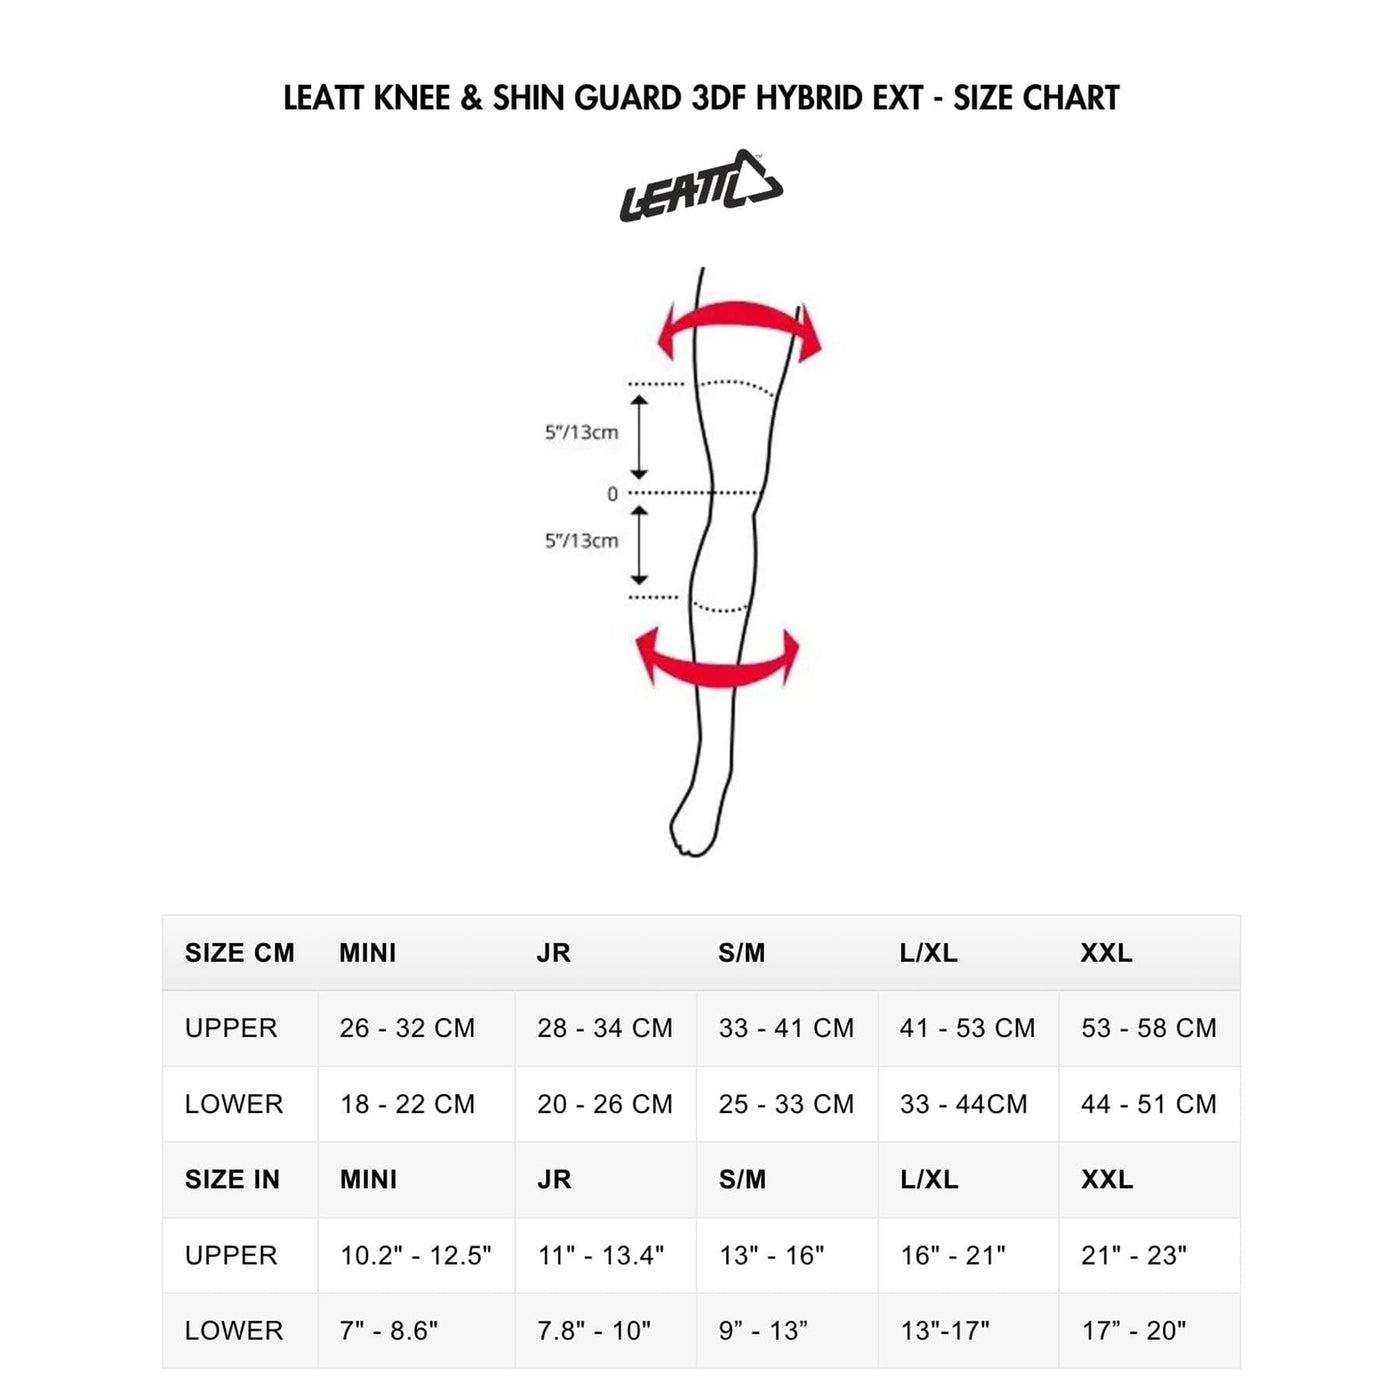 LEATT KNEE & SHIN GUARD 3DF HYBRID EXT - SIZE CHART | 8Lines.eu - fast delivery!